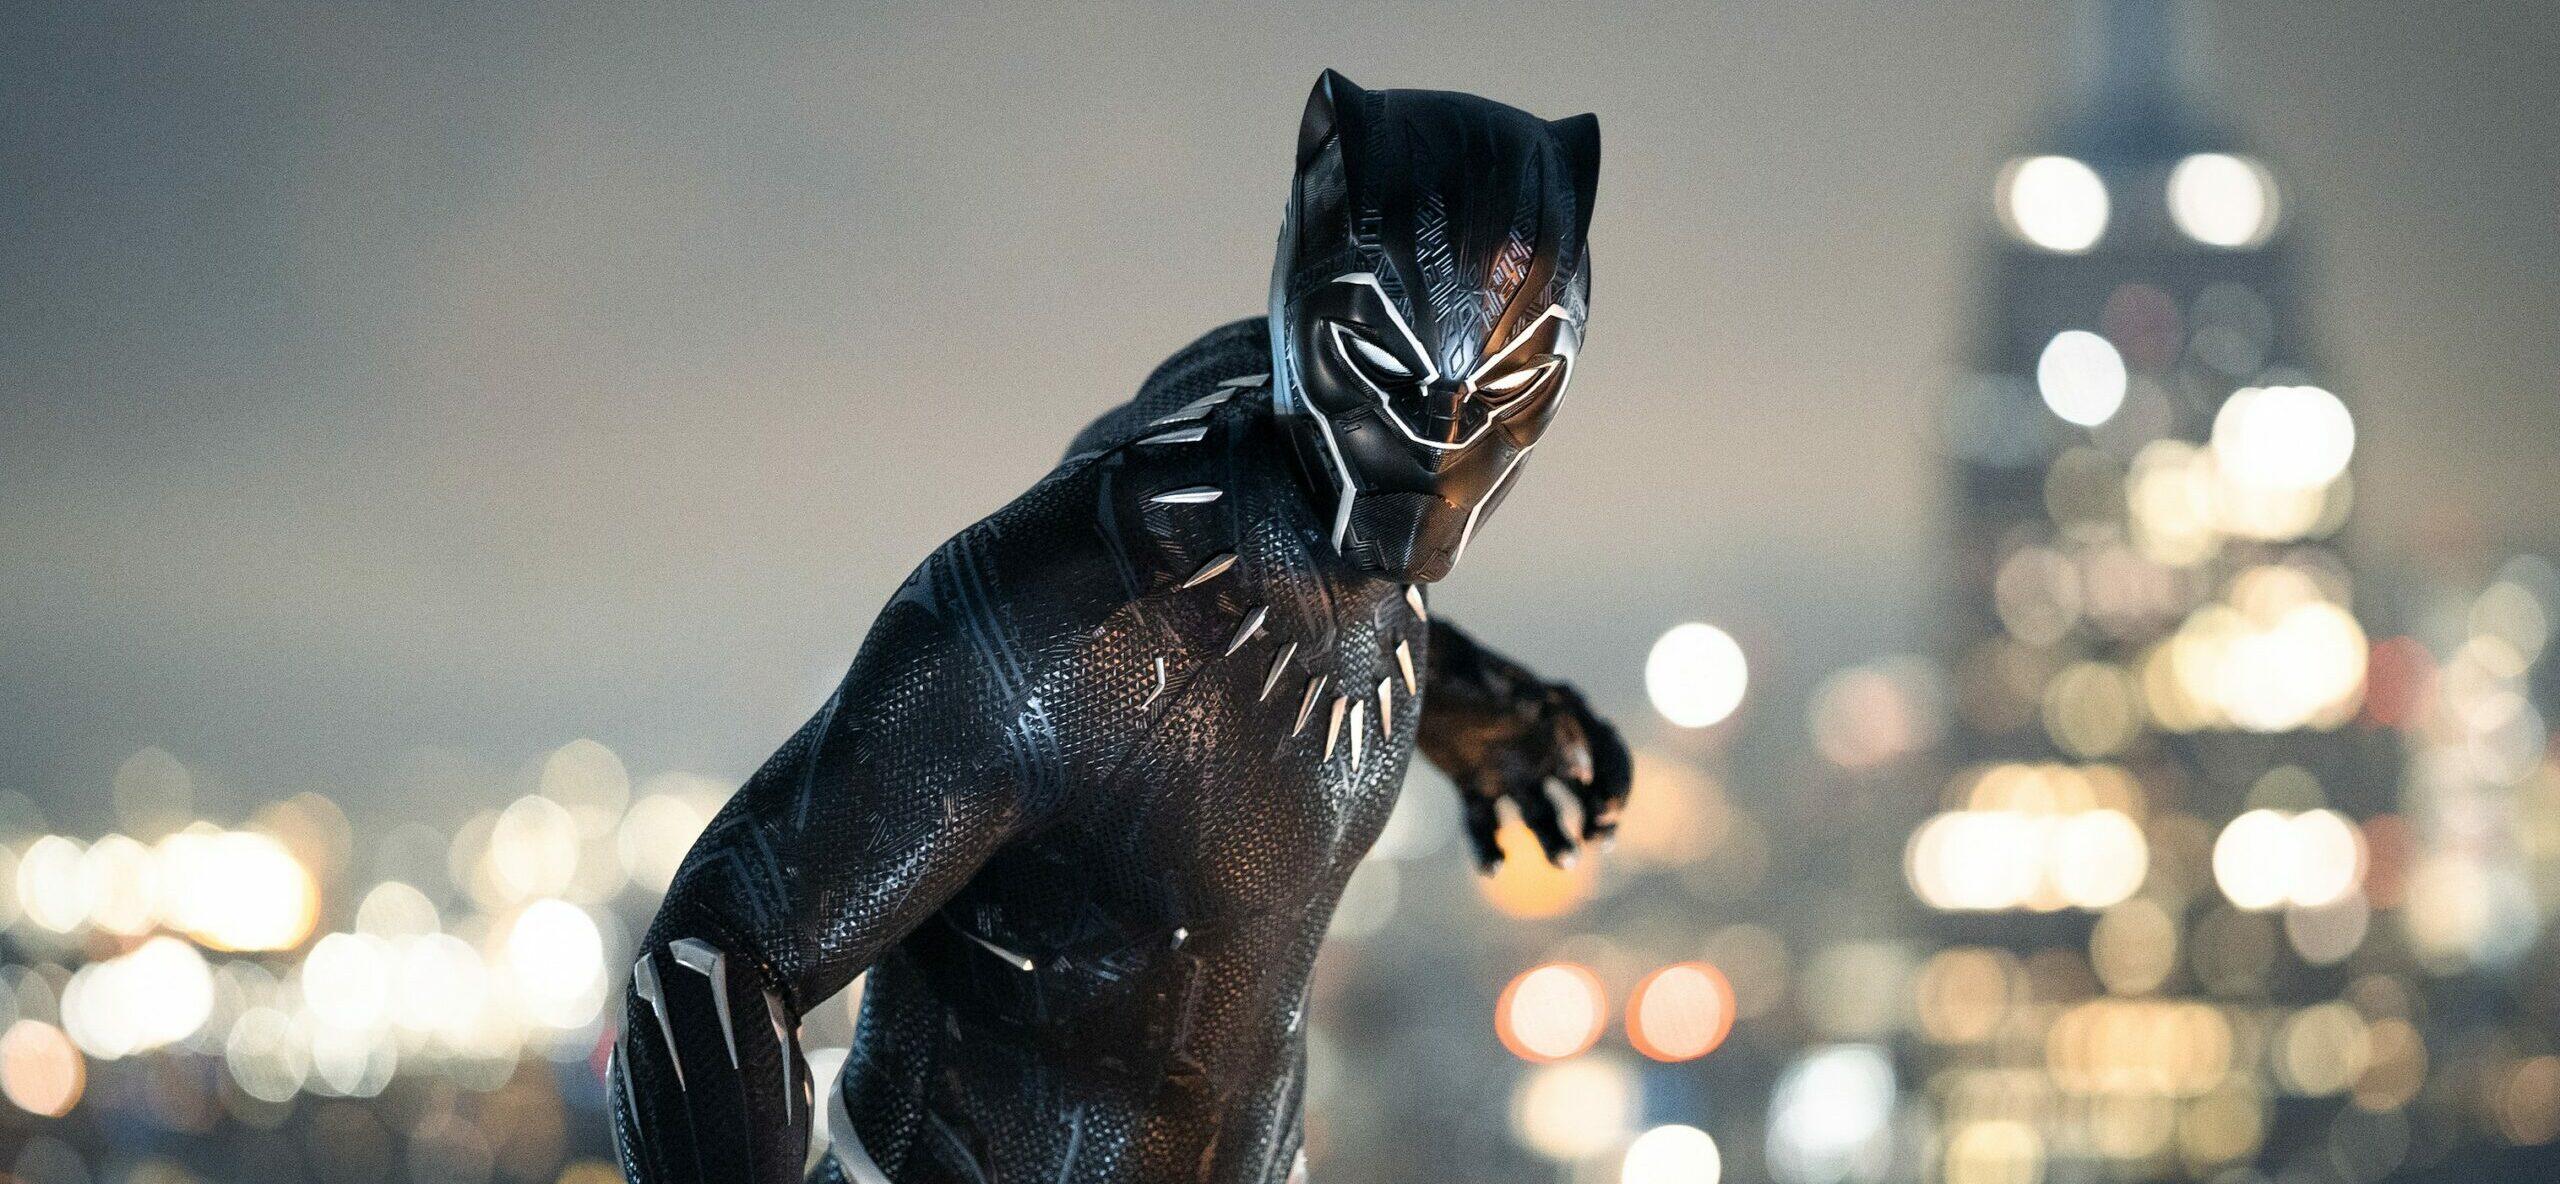 French Defense Ministry Condemns Black Panther’s ‘Propaganda’